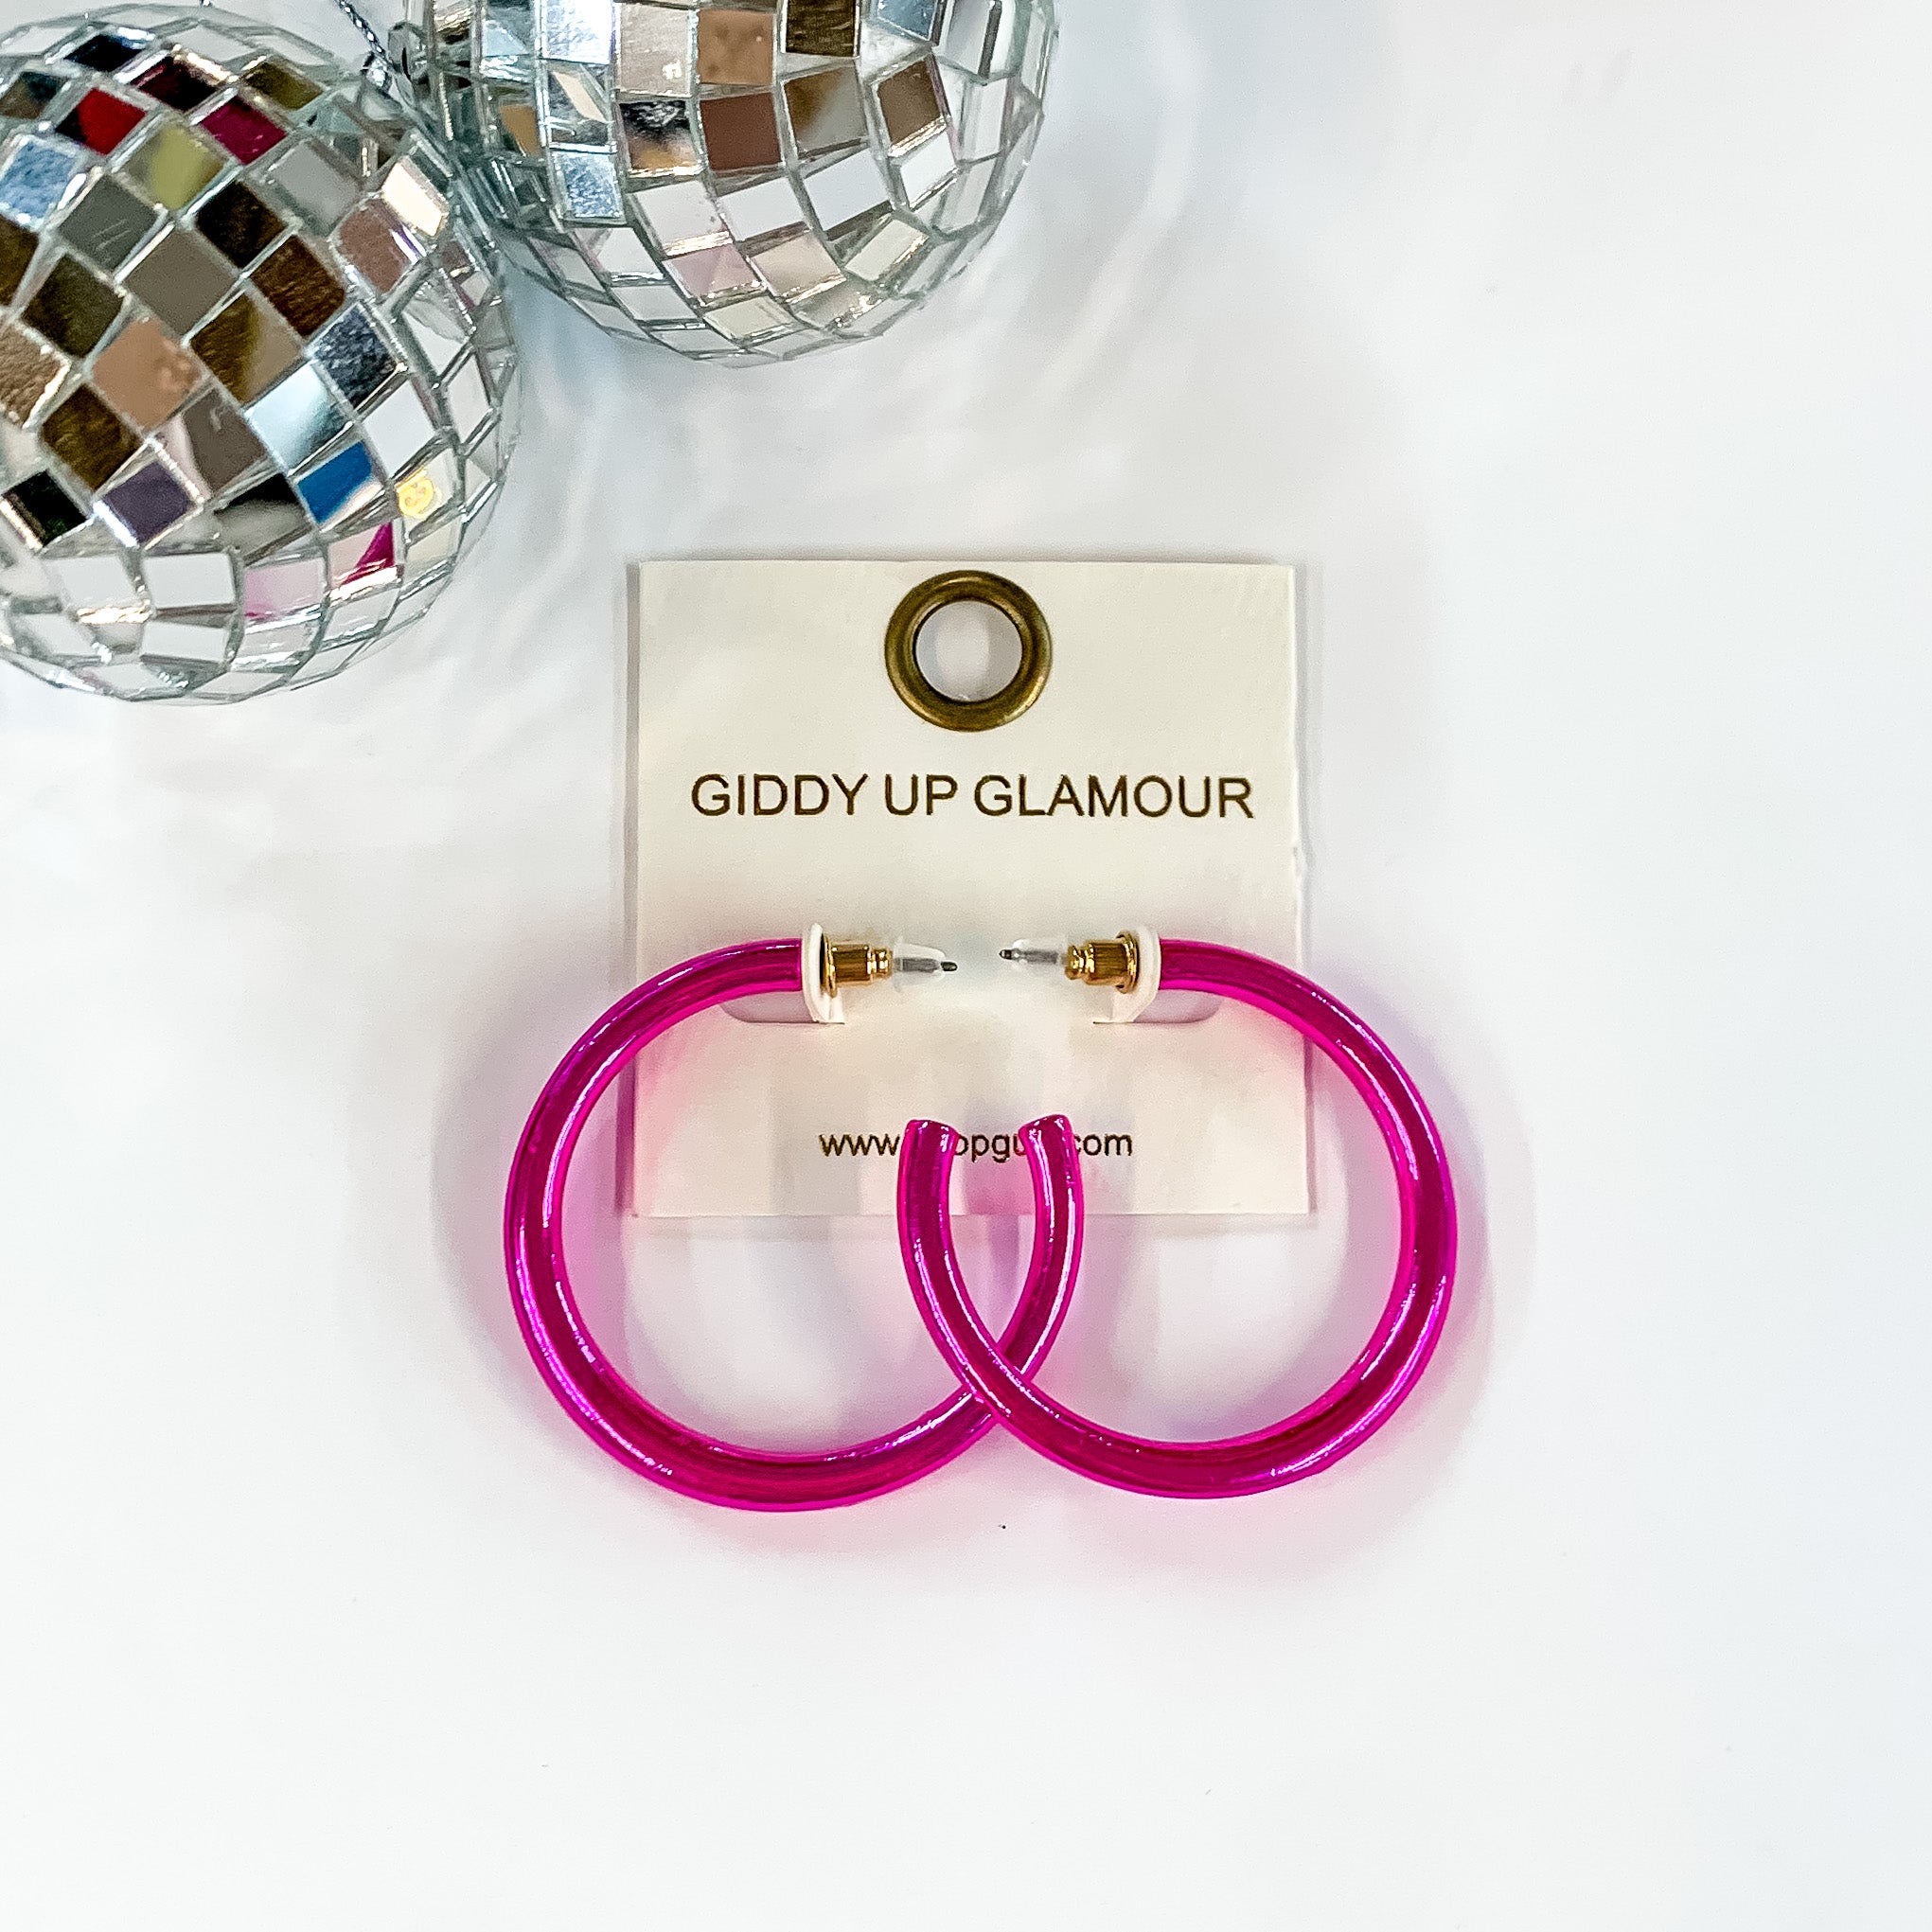 Light up Medium Neon Hoop Earrings in Hot Pink. Pictured on a white background with disco balls in the top left corner.